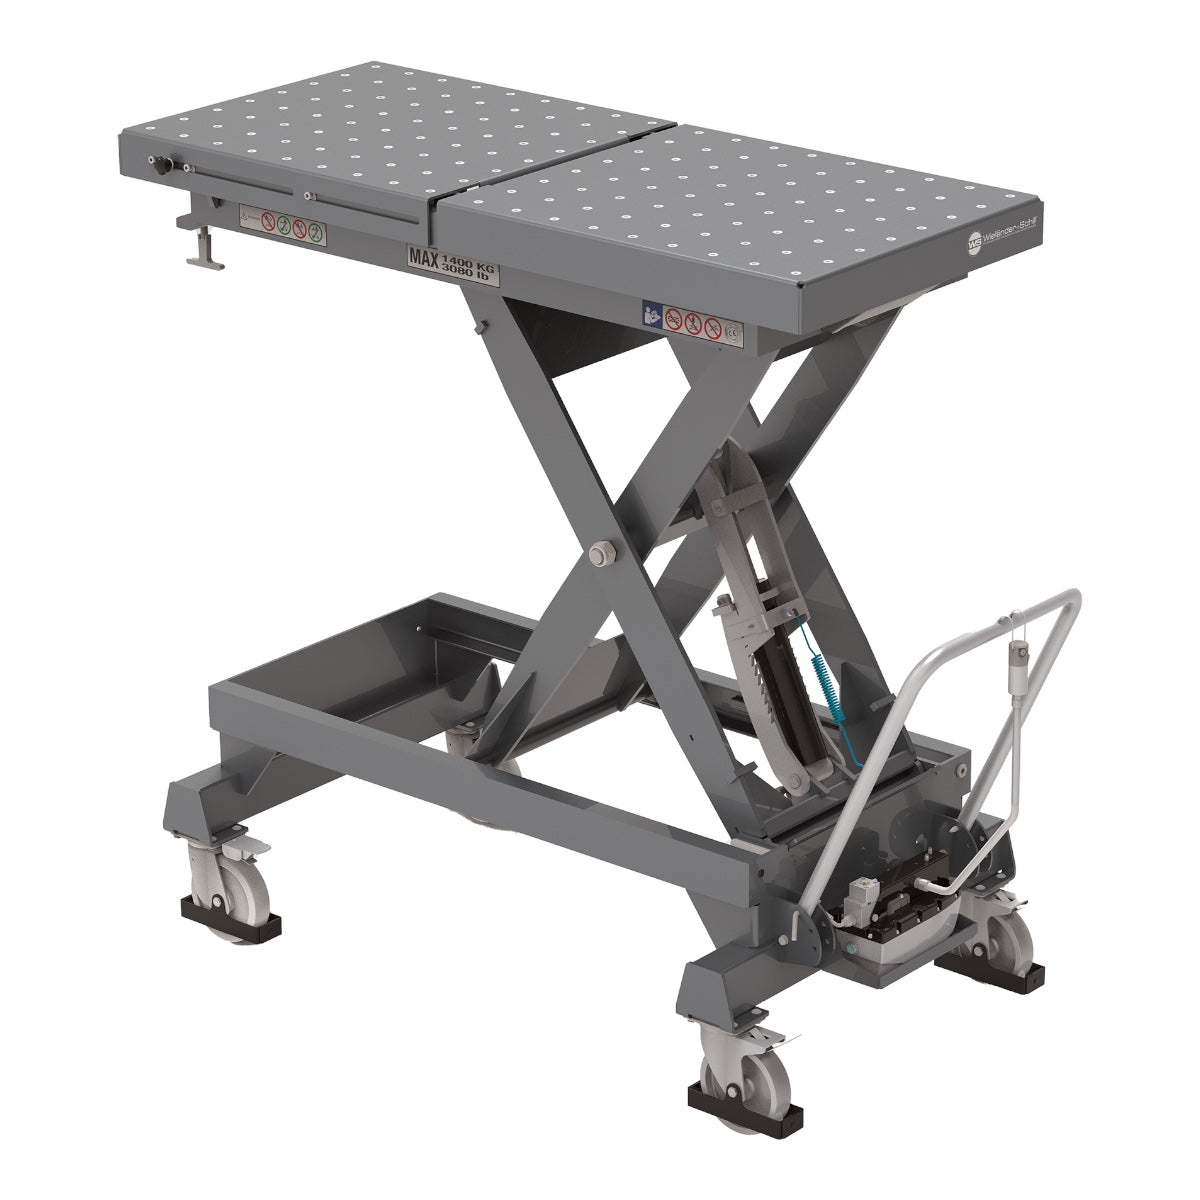 WS Lifter 1.4T pneumatic-hydraulic lifting table for HV batteries, motors, etc. 